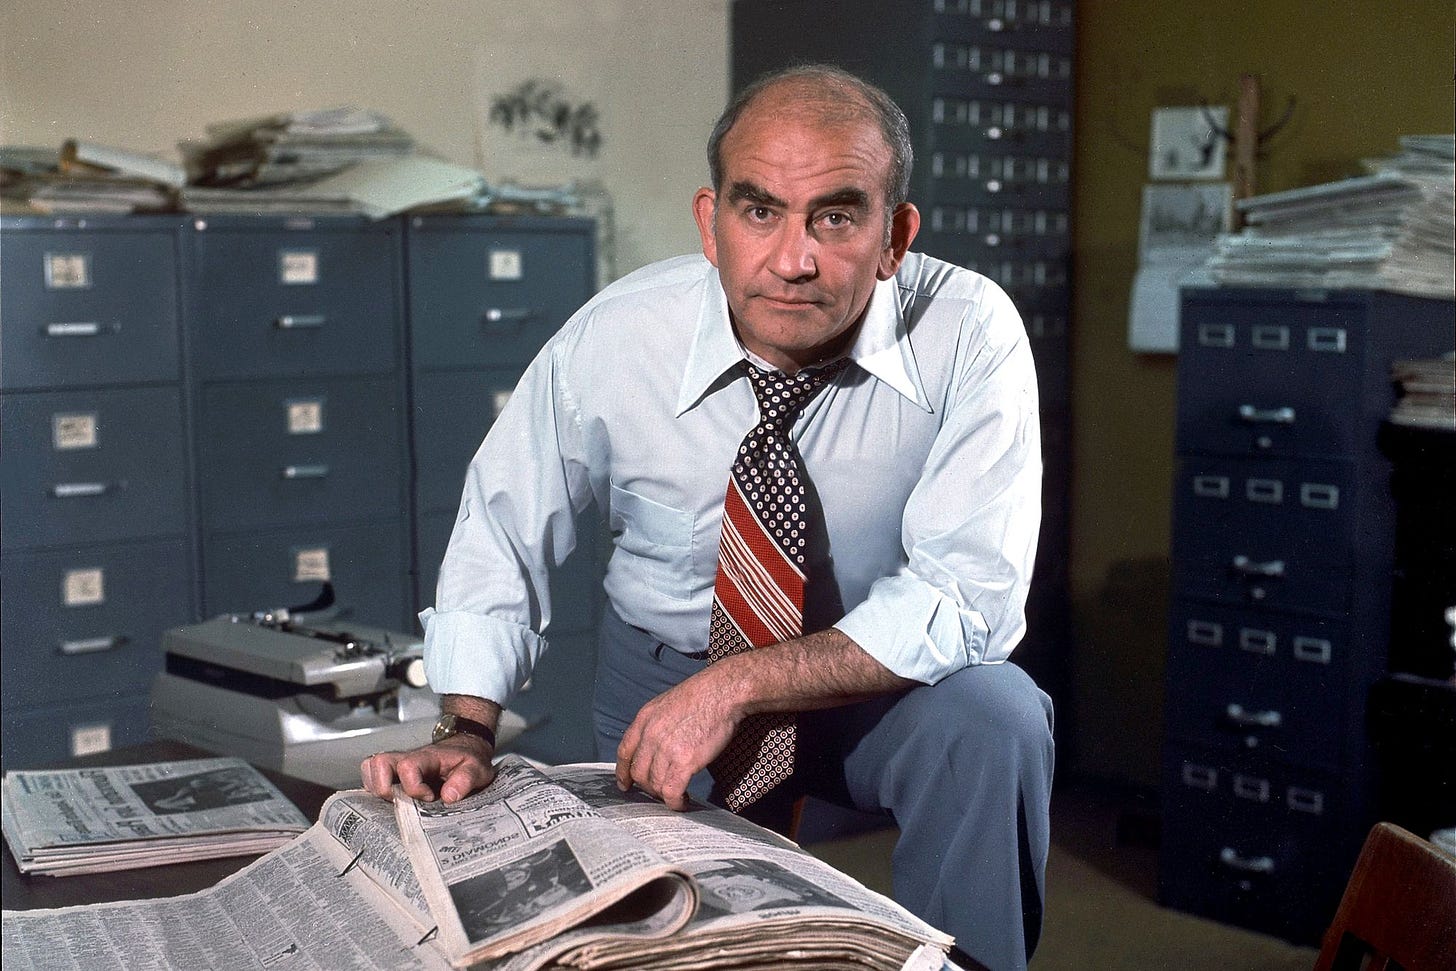 RIP Ed Asner - The star of Up, Lou Grant, and The Mary Tyler Moore was 91